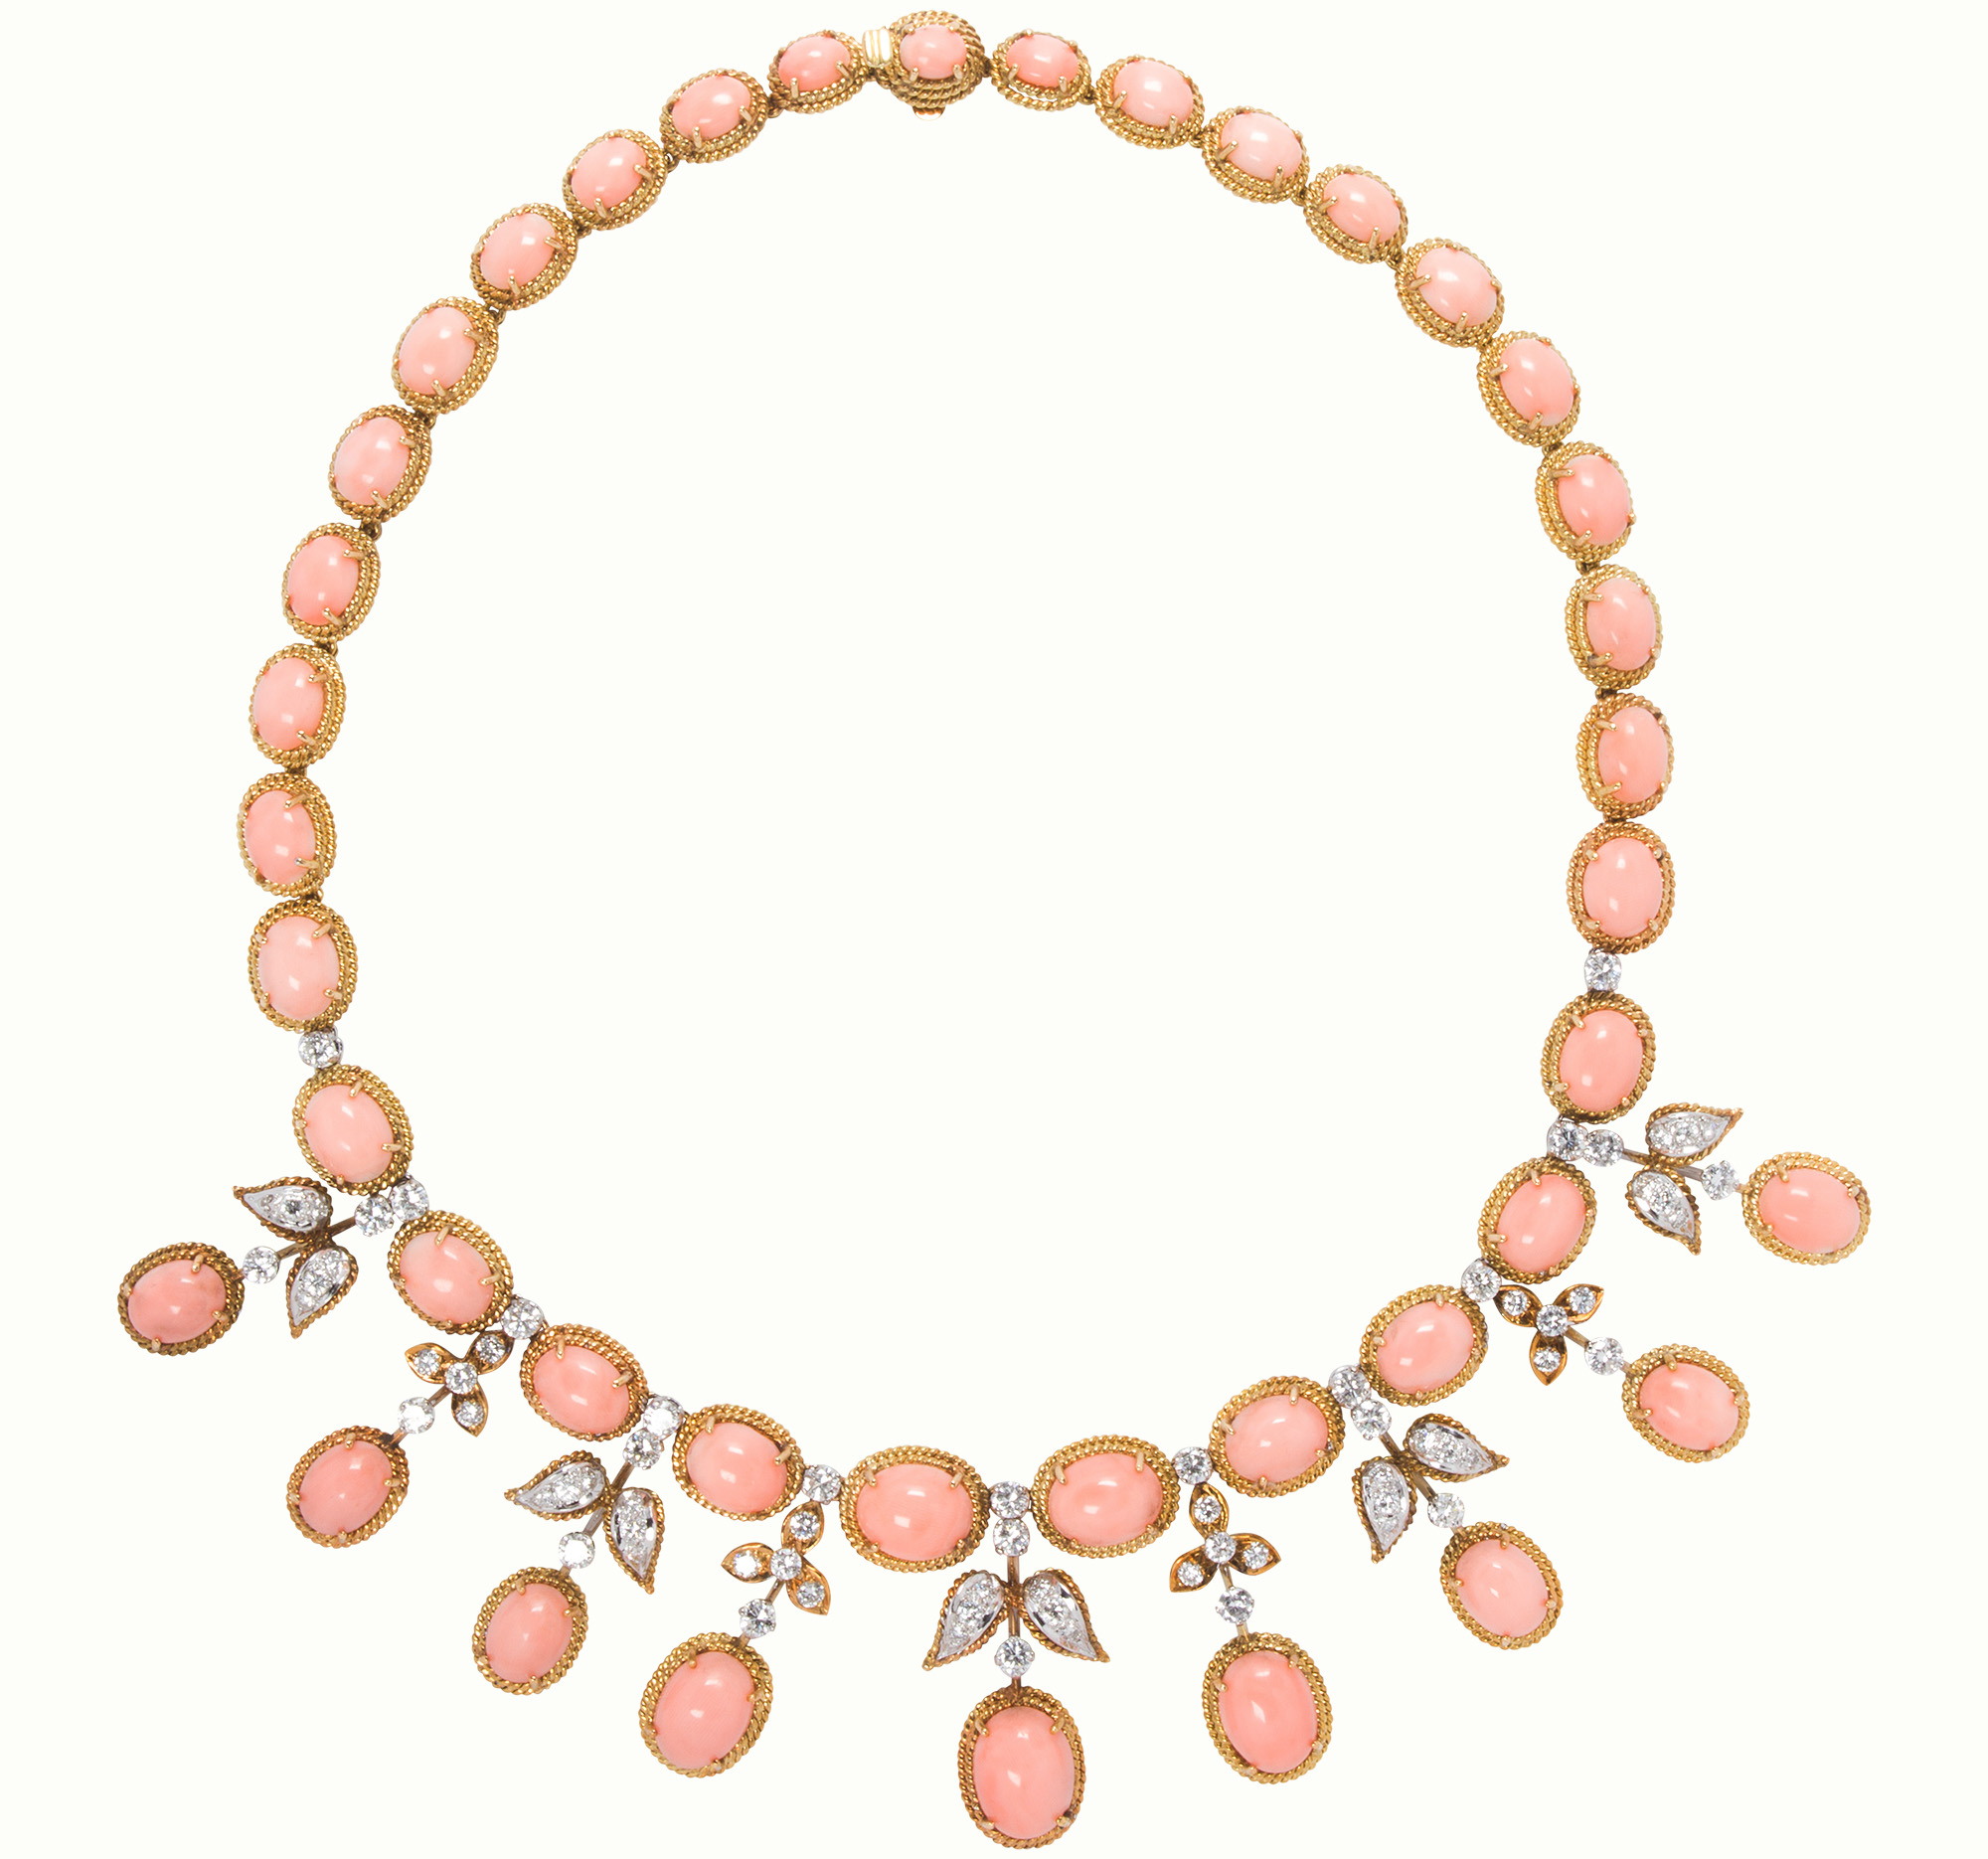 A coral, diamond and 18k bi-color gold necklace, Vourakis.